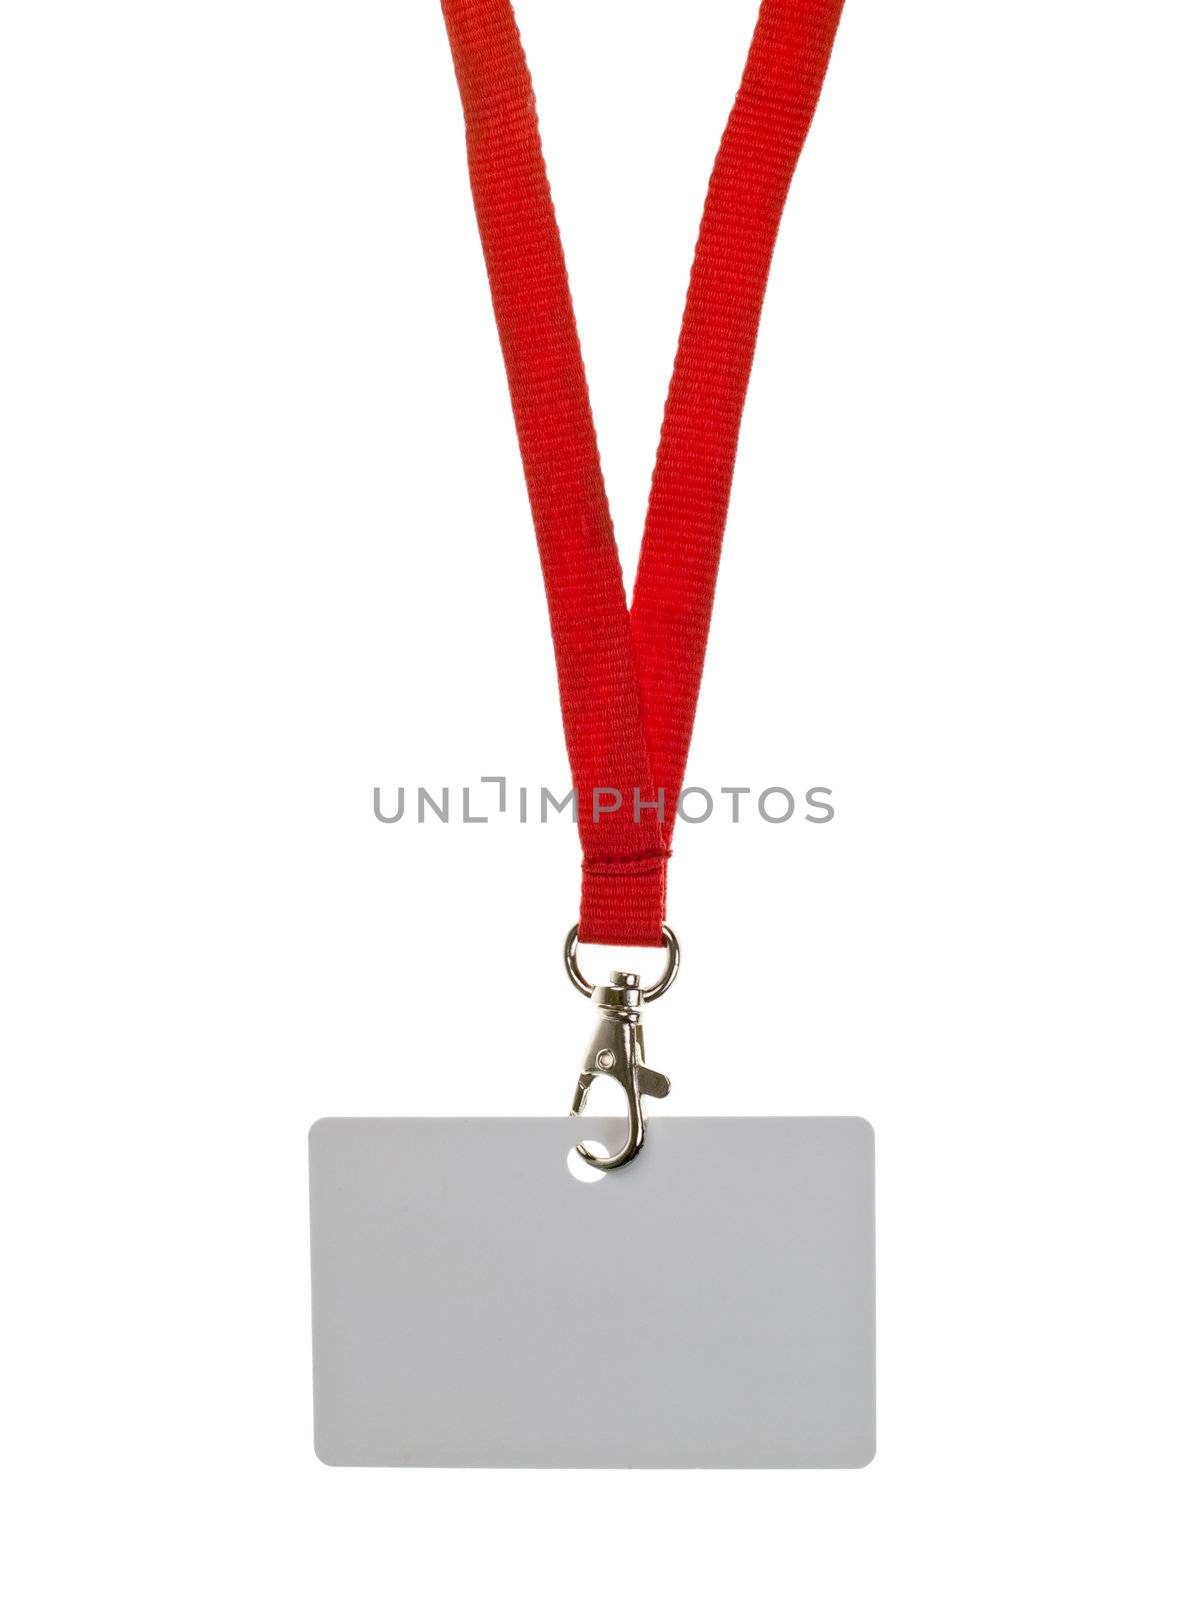 Blank badge with red neckband on white background